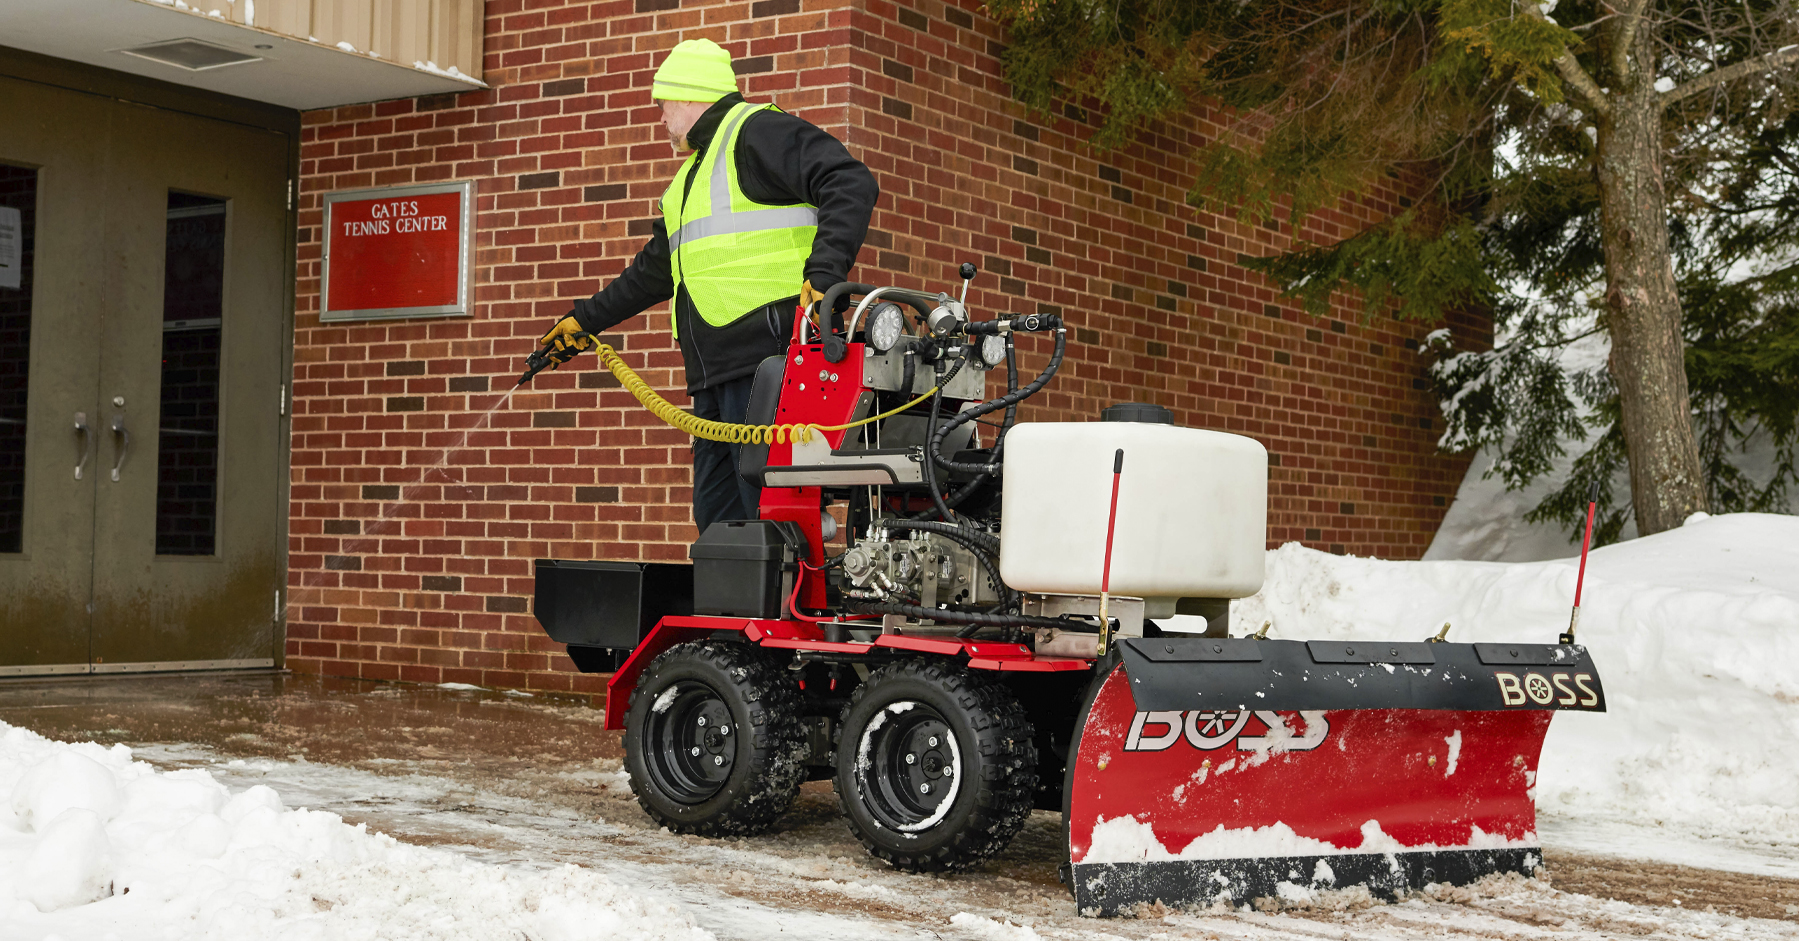 The BOSS Snowrator: Everything You Need to Know